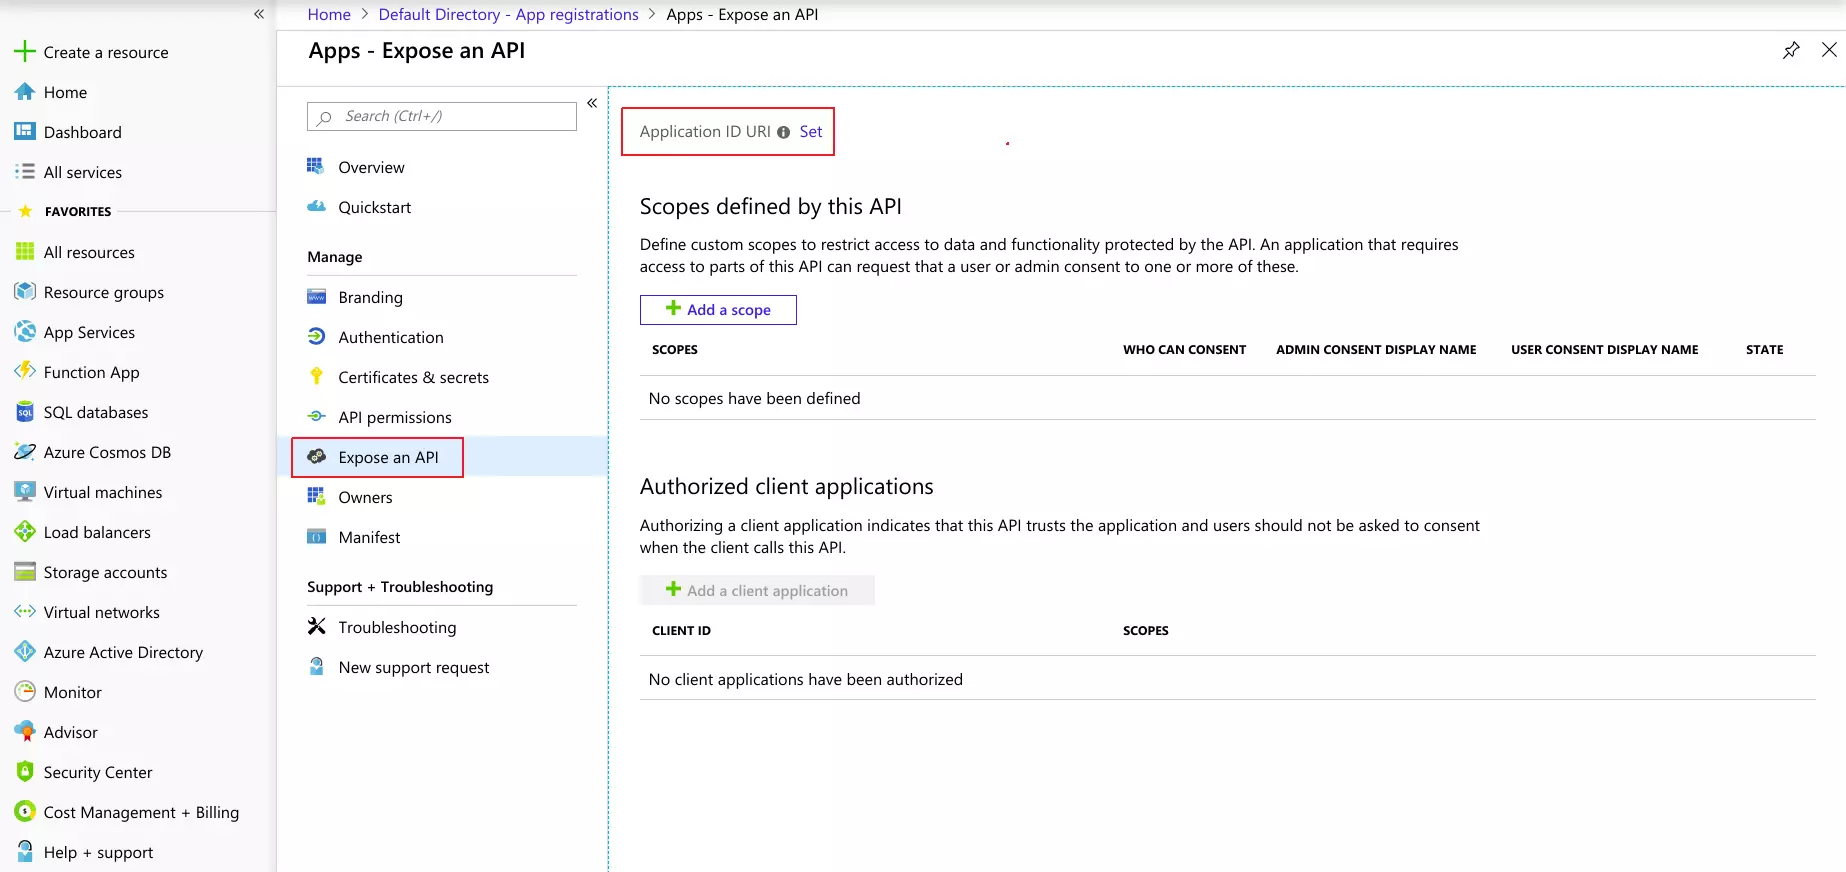 nopCommerce Single Sign-On (SSO) using Azure AD as IDP - Expose an API)